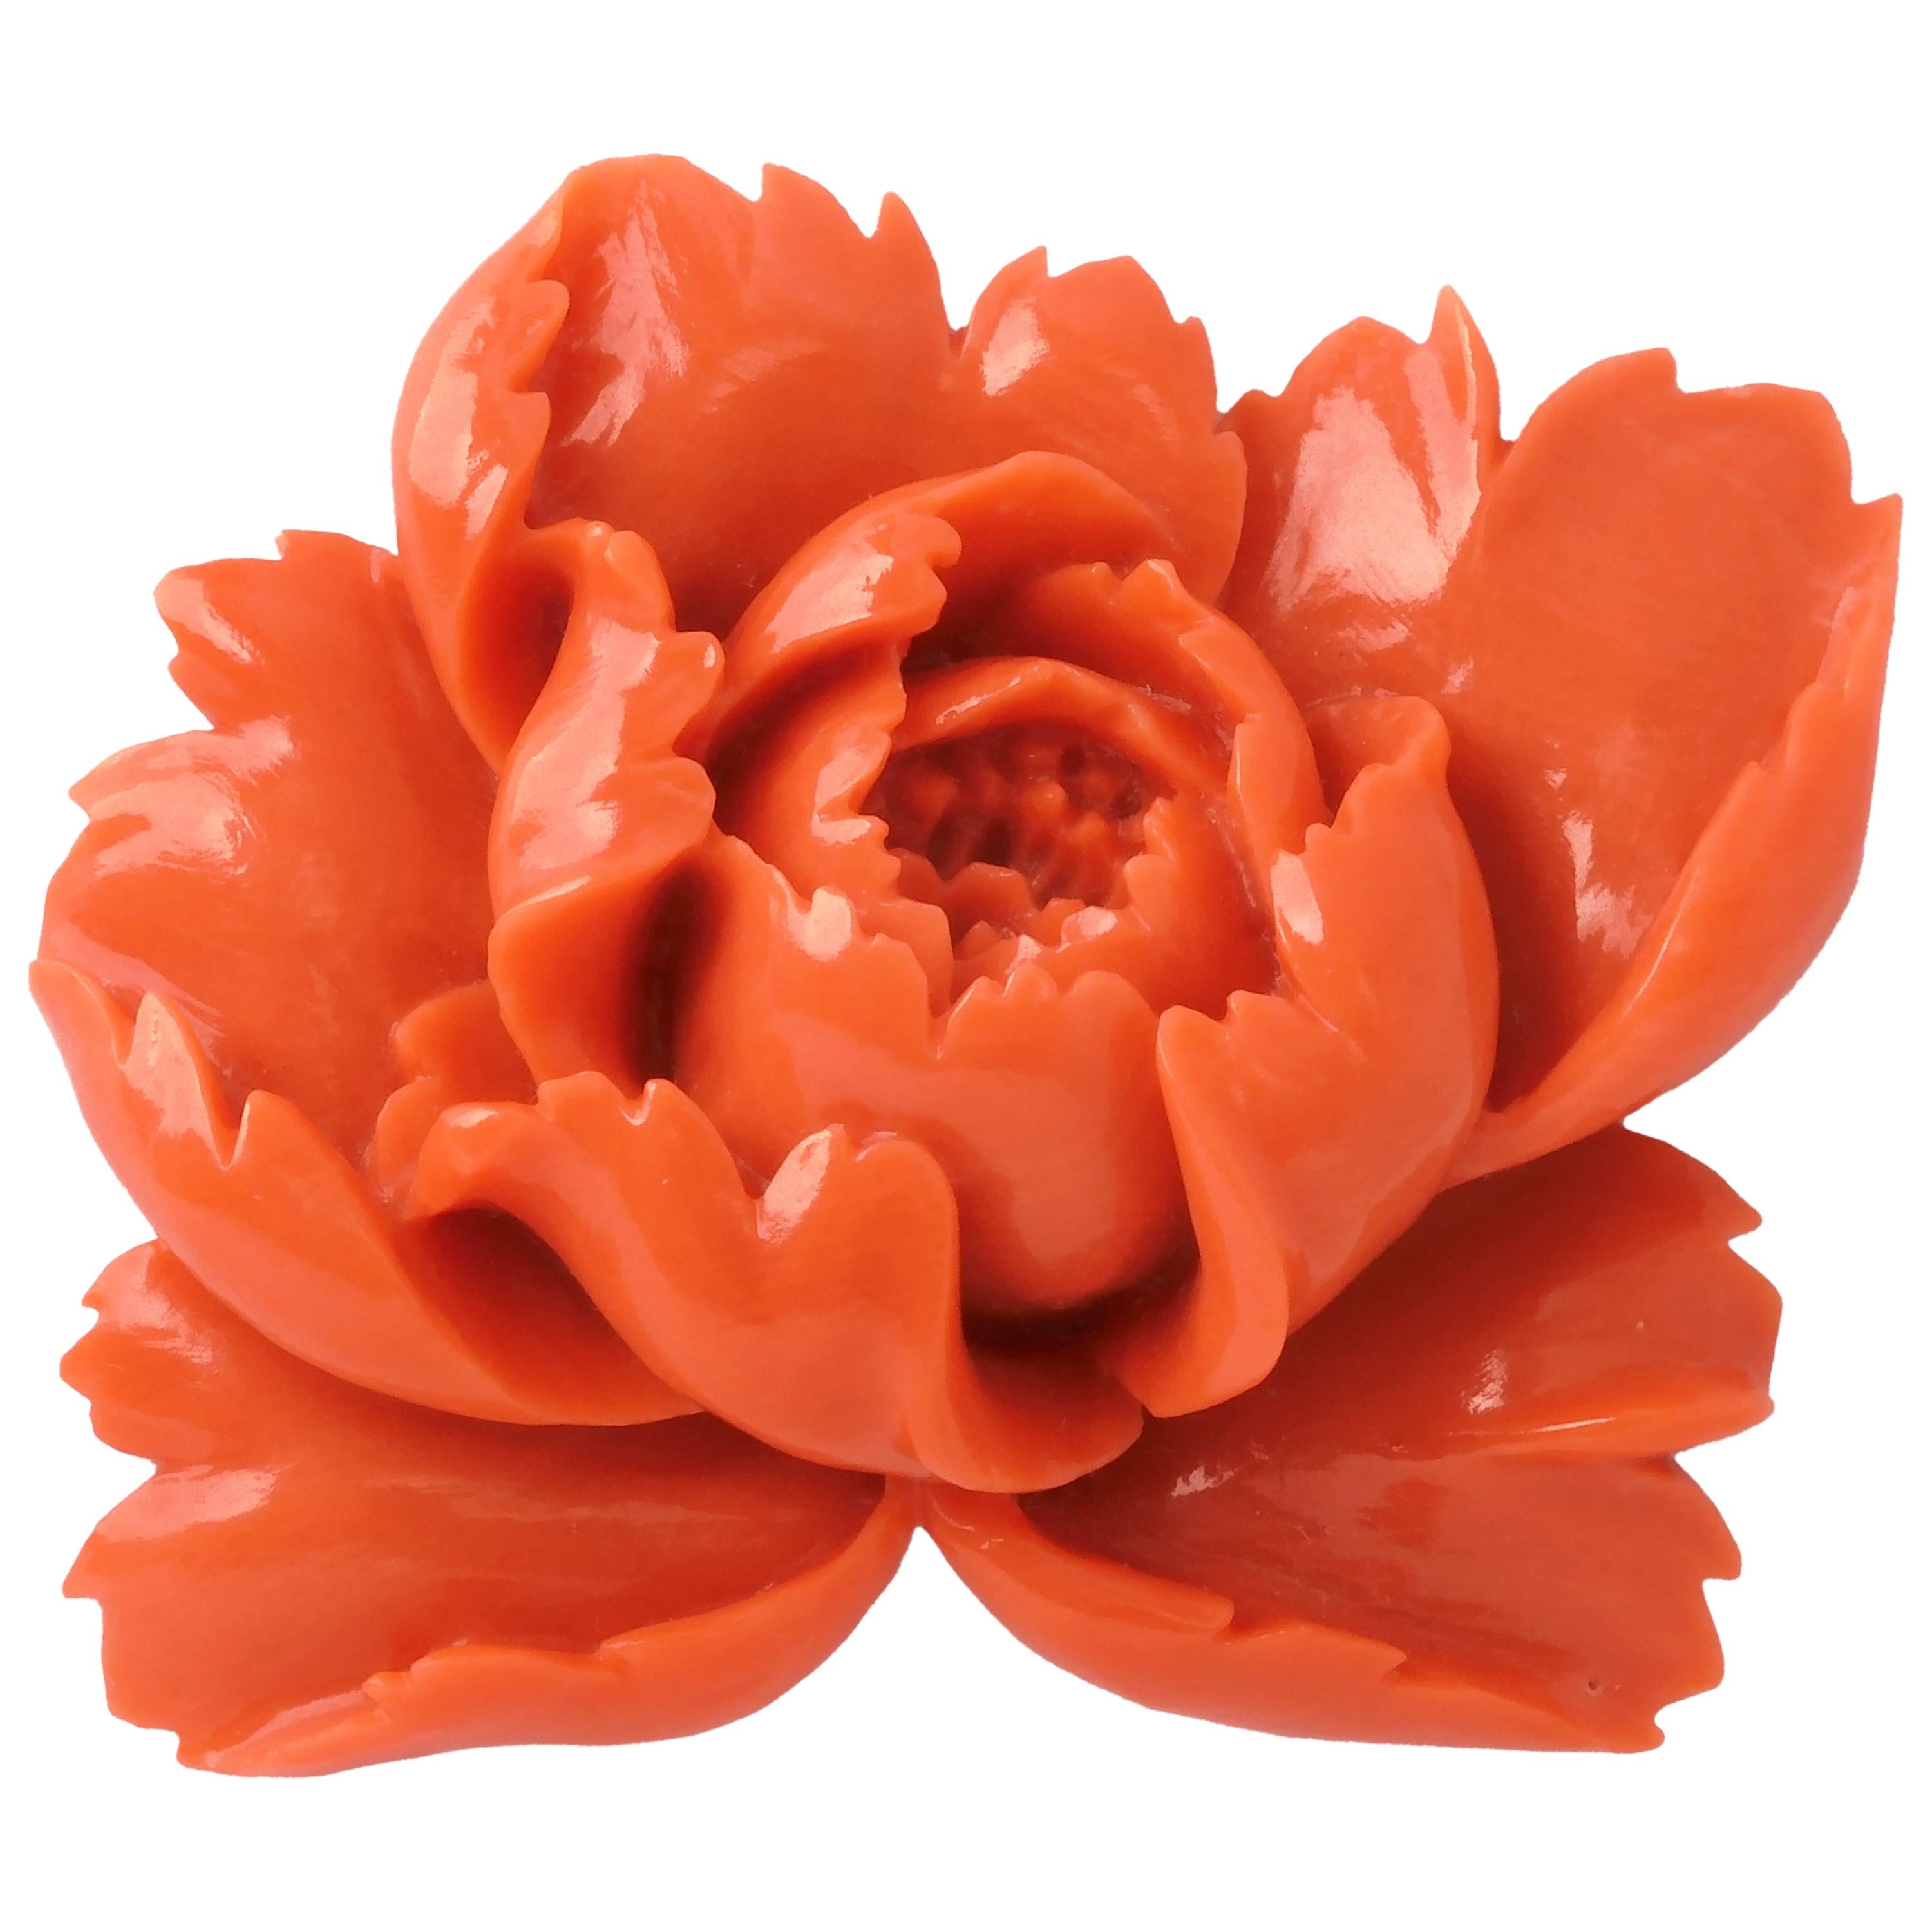 Vintage Japanese Momoiro Sango Carved Coral Plate, Peony Flower For Sale